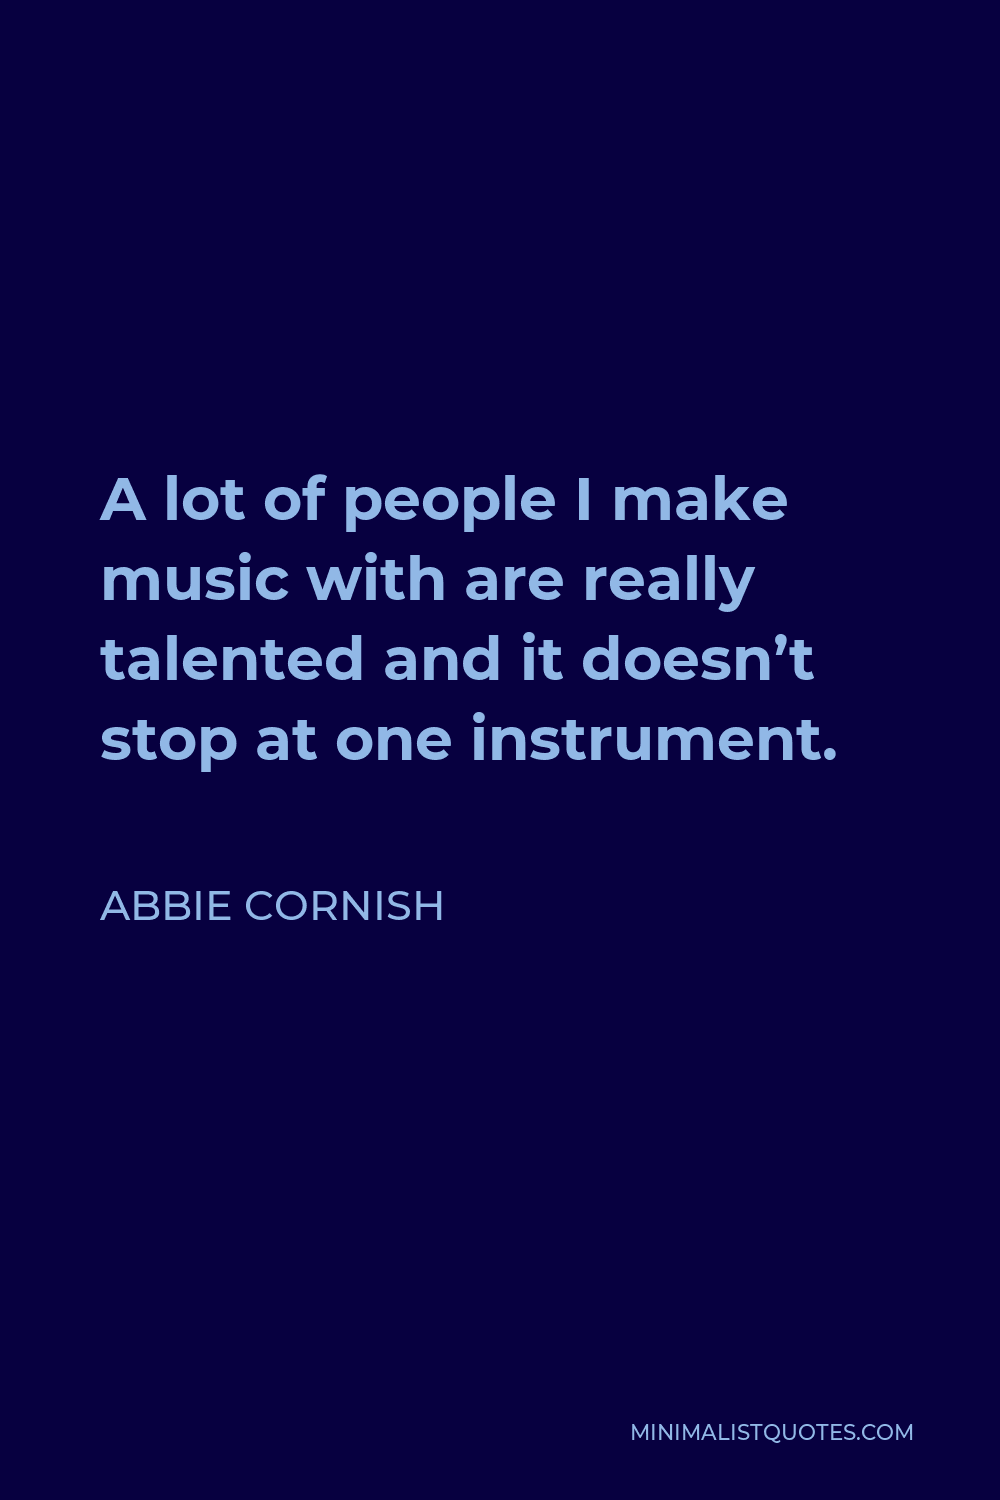 Abbie Cornish Quote - A lot of people I make music with are really talented and it doesn’t stop at one instrument.